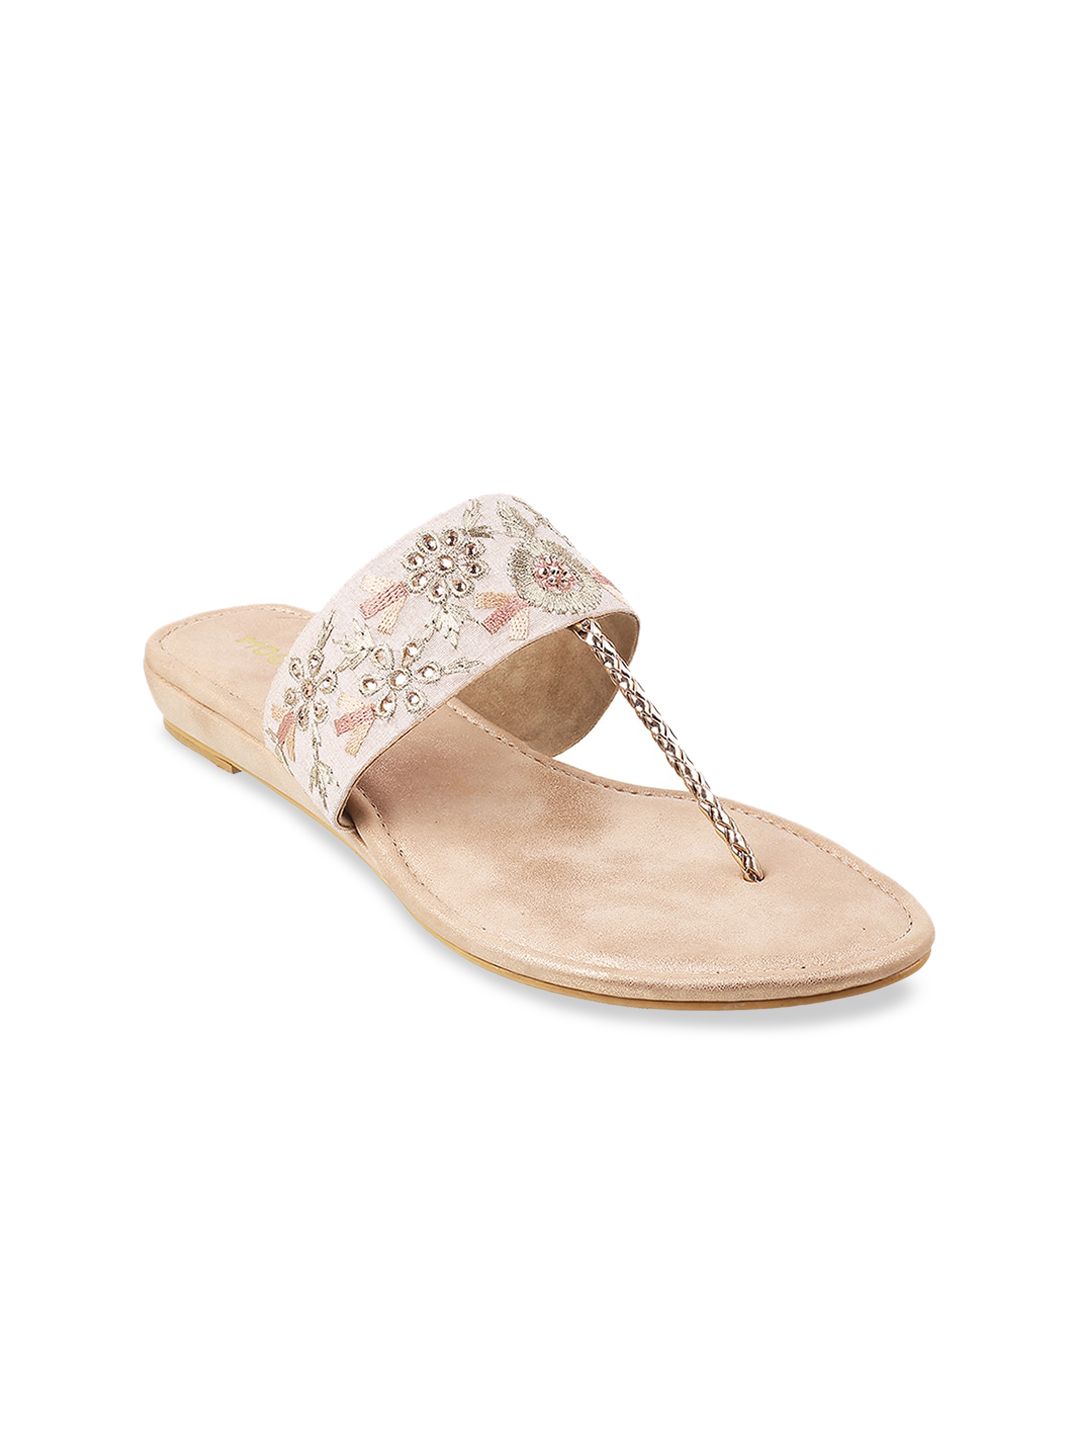 Mochi Women Gold-Toned Embellished T-Strap Flats Price in India